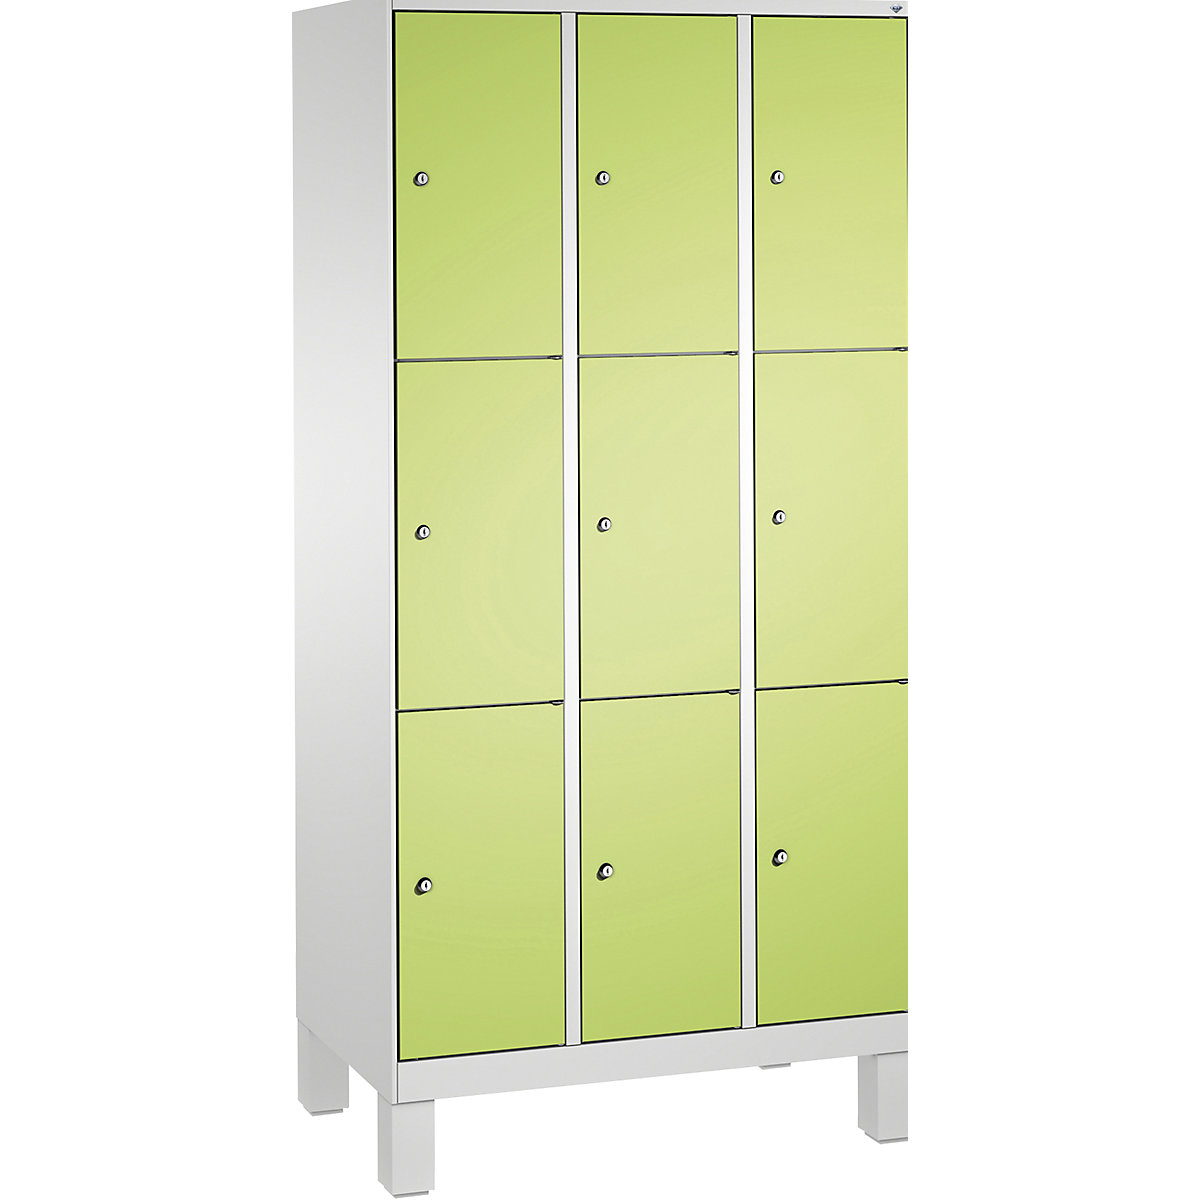 EVOLO locker unit, with feet – C+P, 3 compartments, 3 shelf compartments each, compartment width 300 mm, light grey / viridian green-5